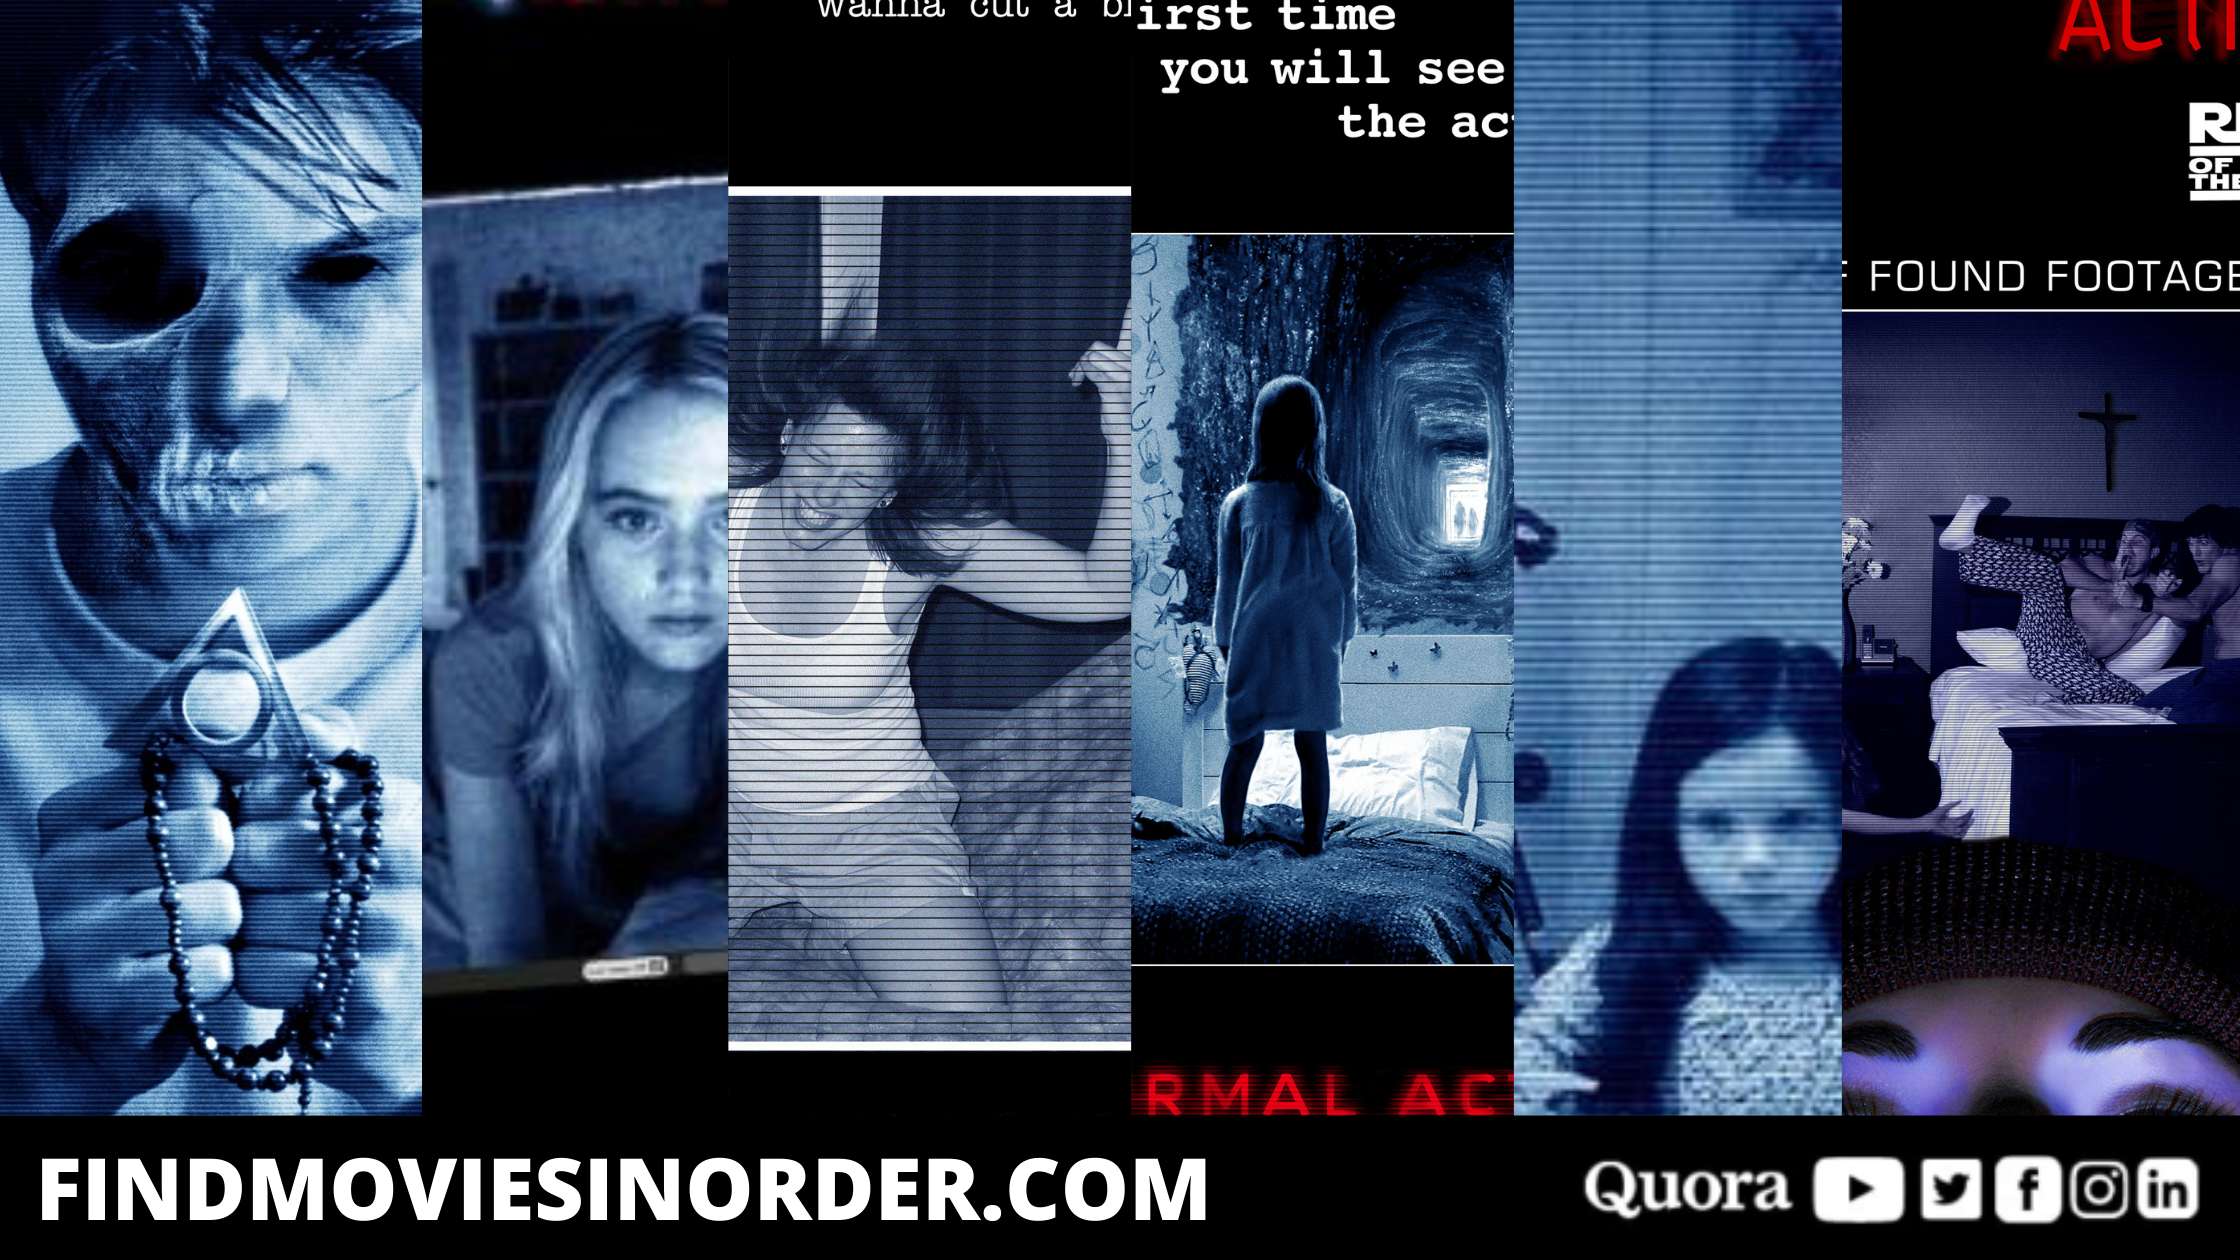 what is the correct order of paranormal activity movies